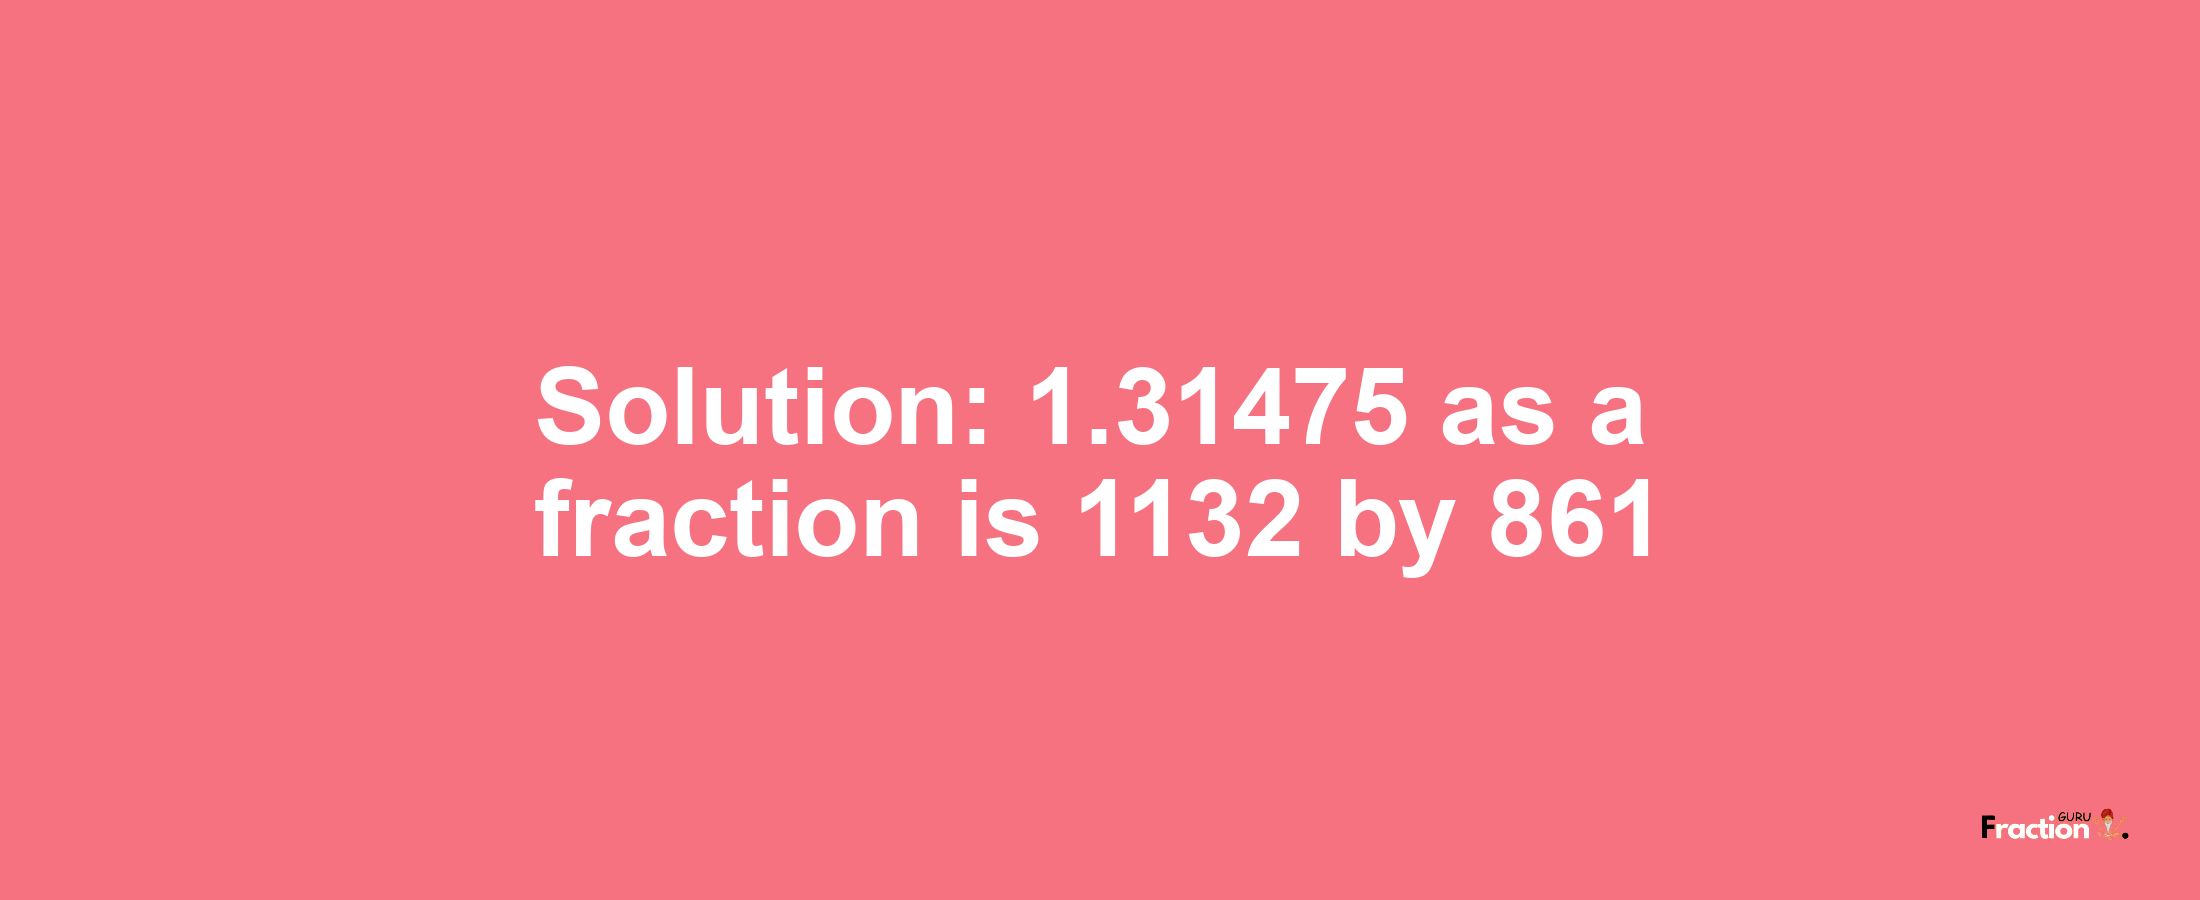 Solution:1.31475 as a fraction is 1132/861